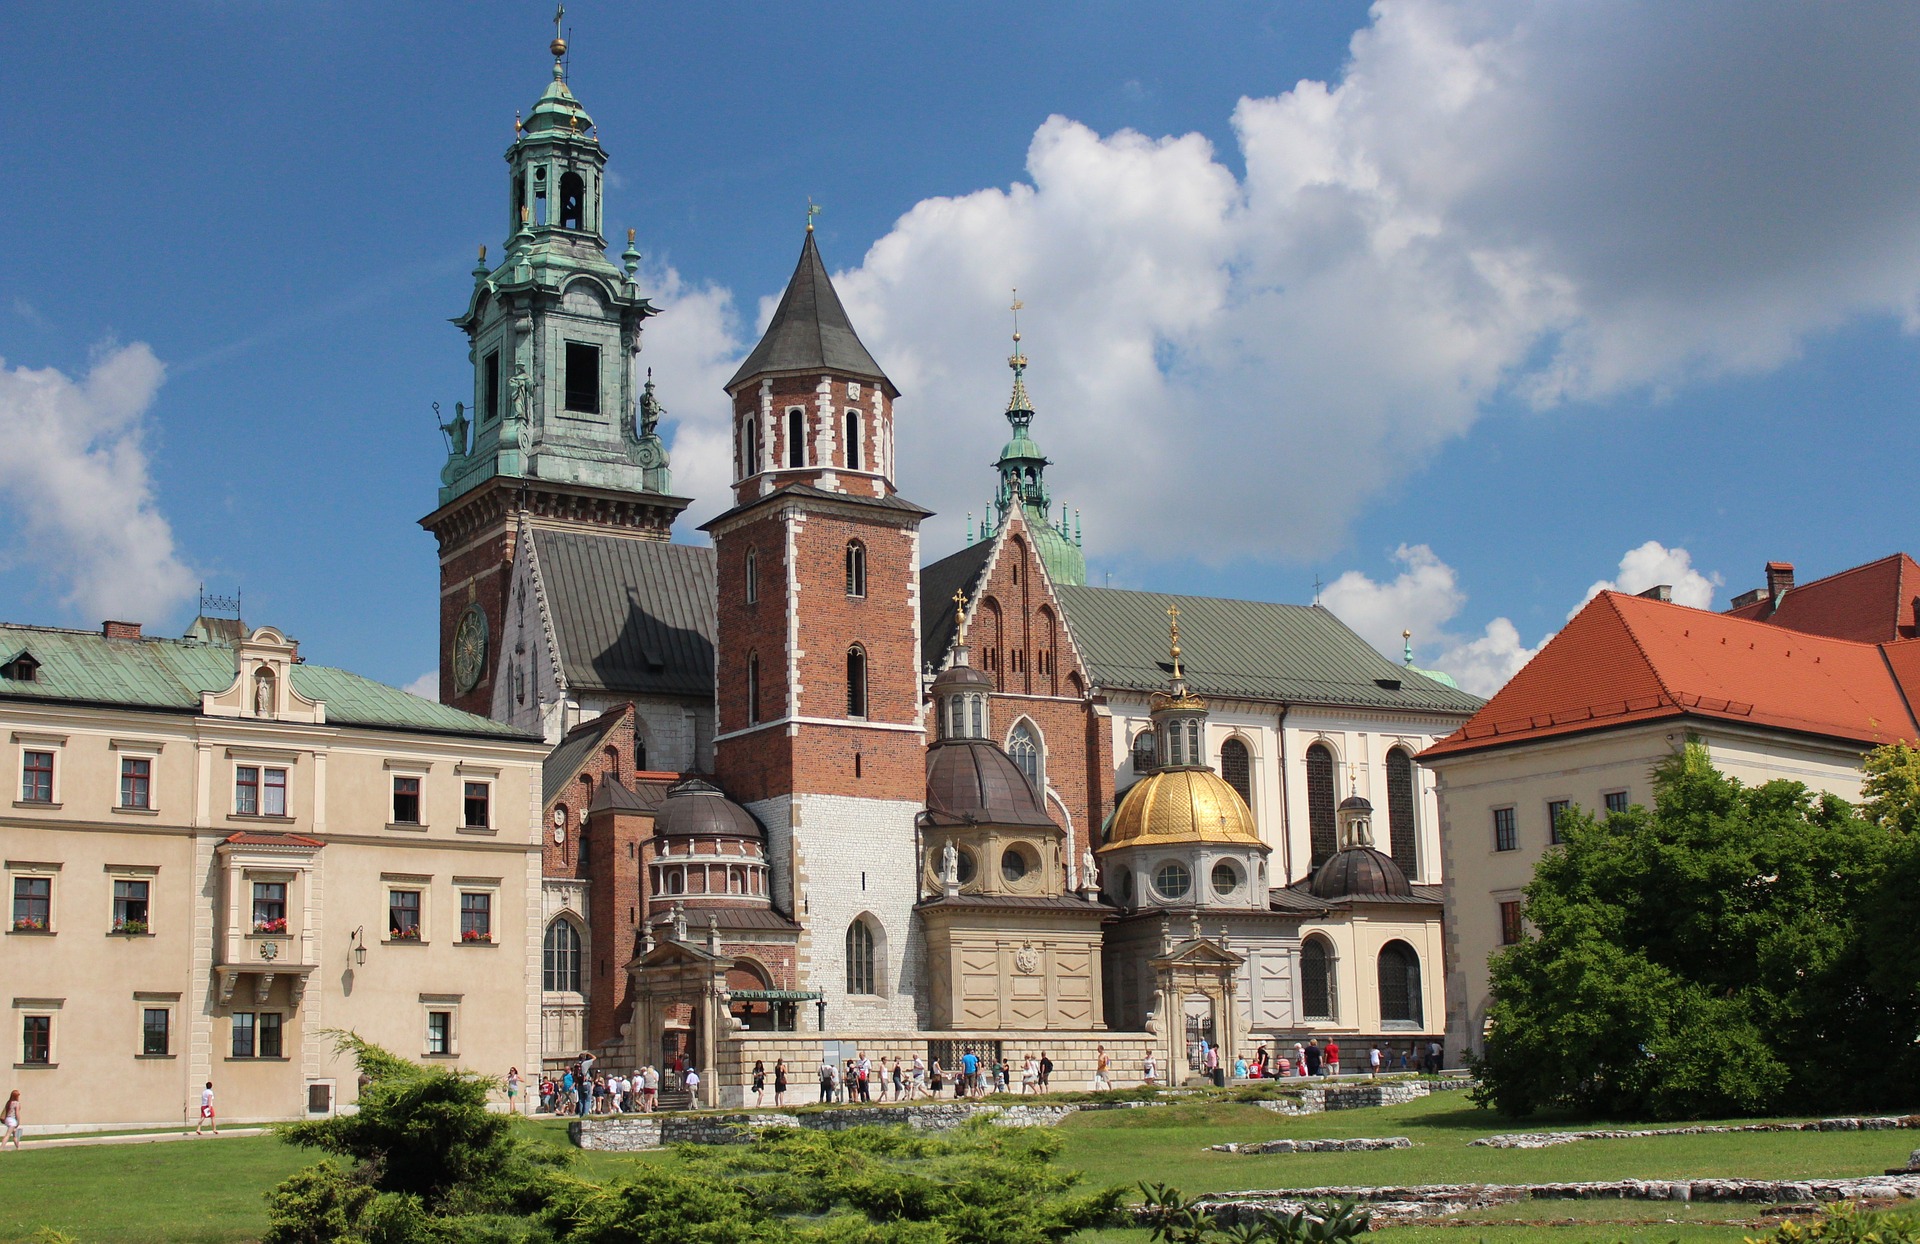 Three must-do day trips from Krakow